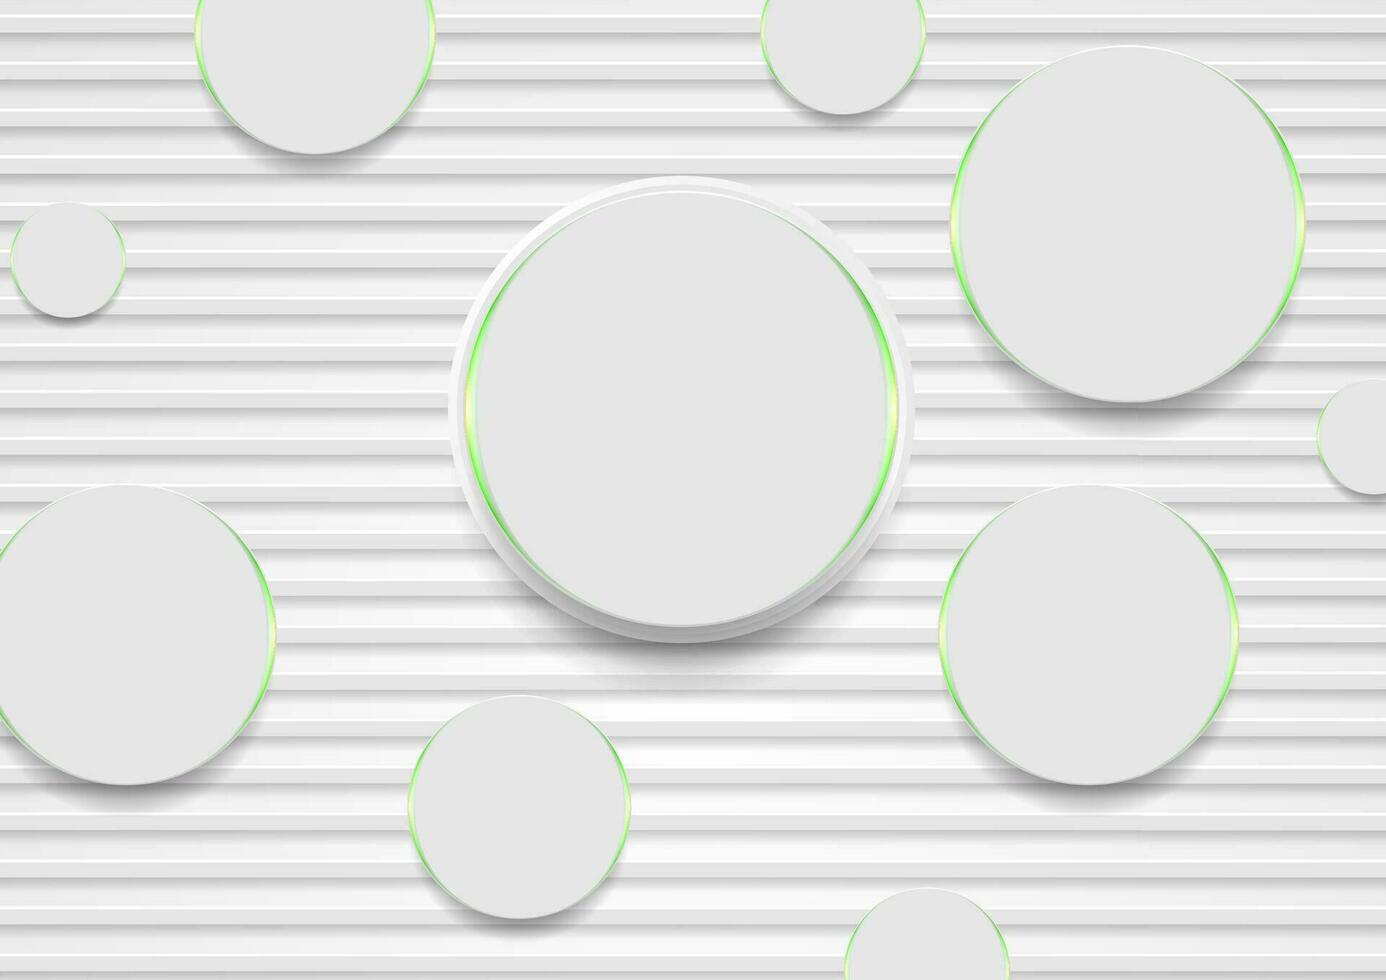 Grey paper stripes and circles with green glowing lights vector